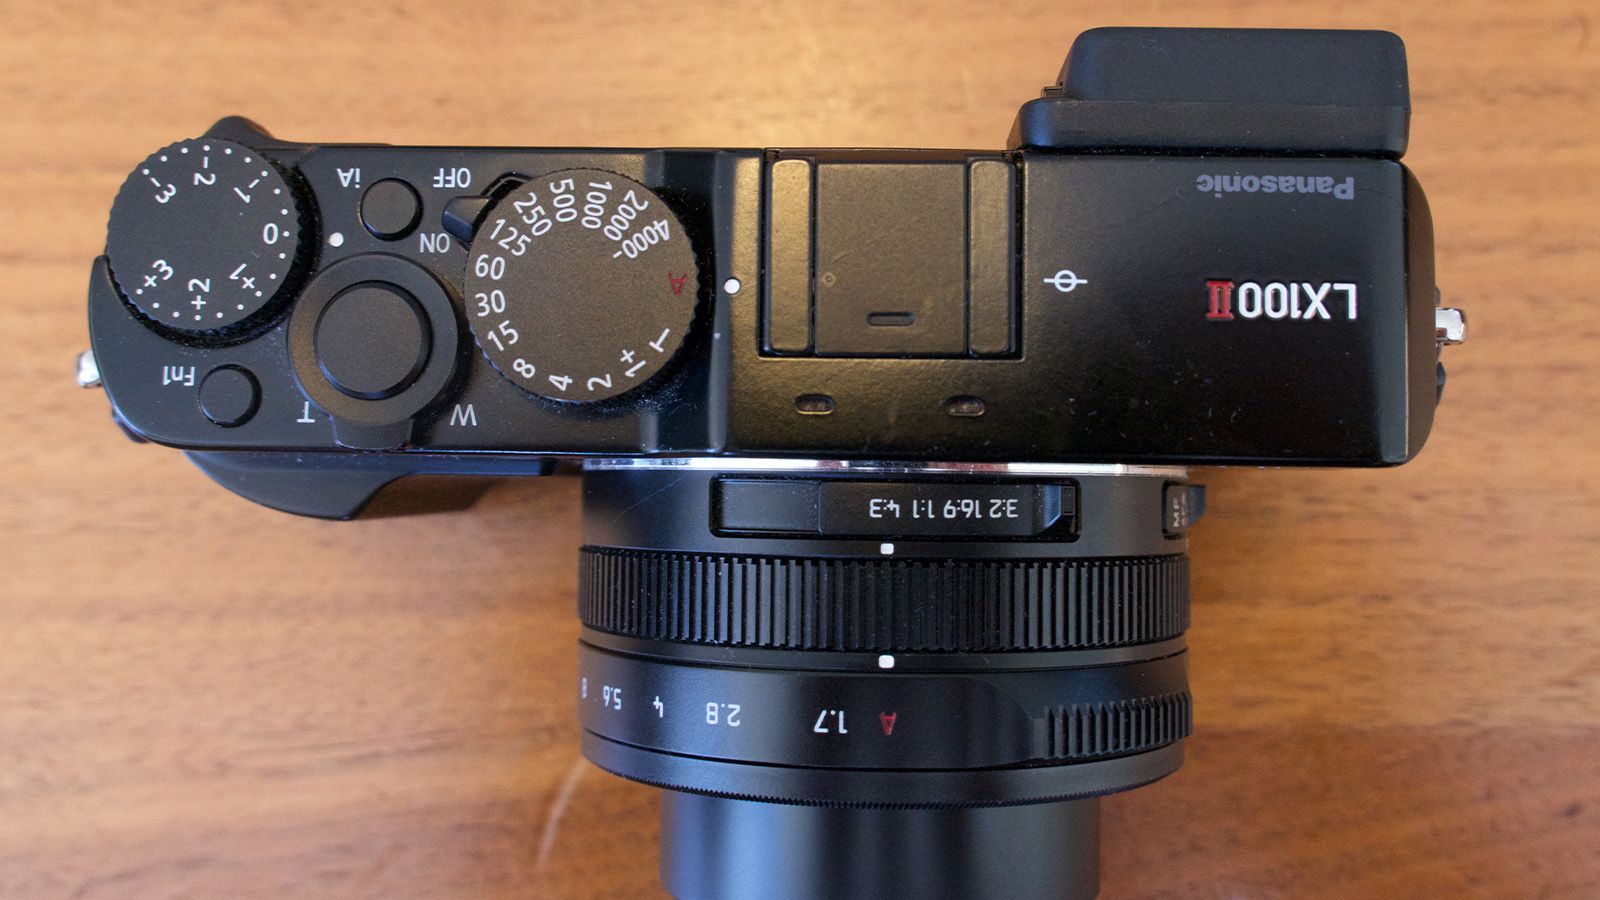 Sony RX100 VII Takes the Best Point-and-Shoot and Makes it Better